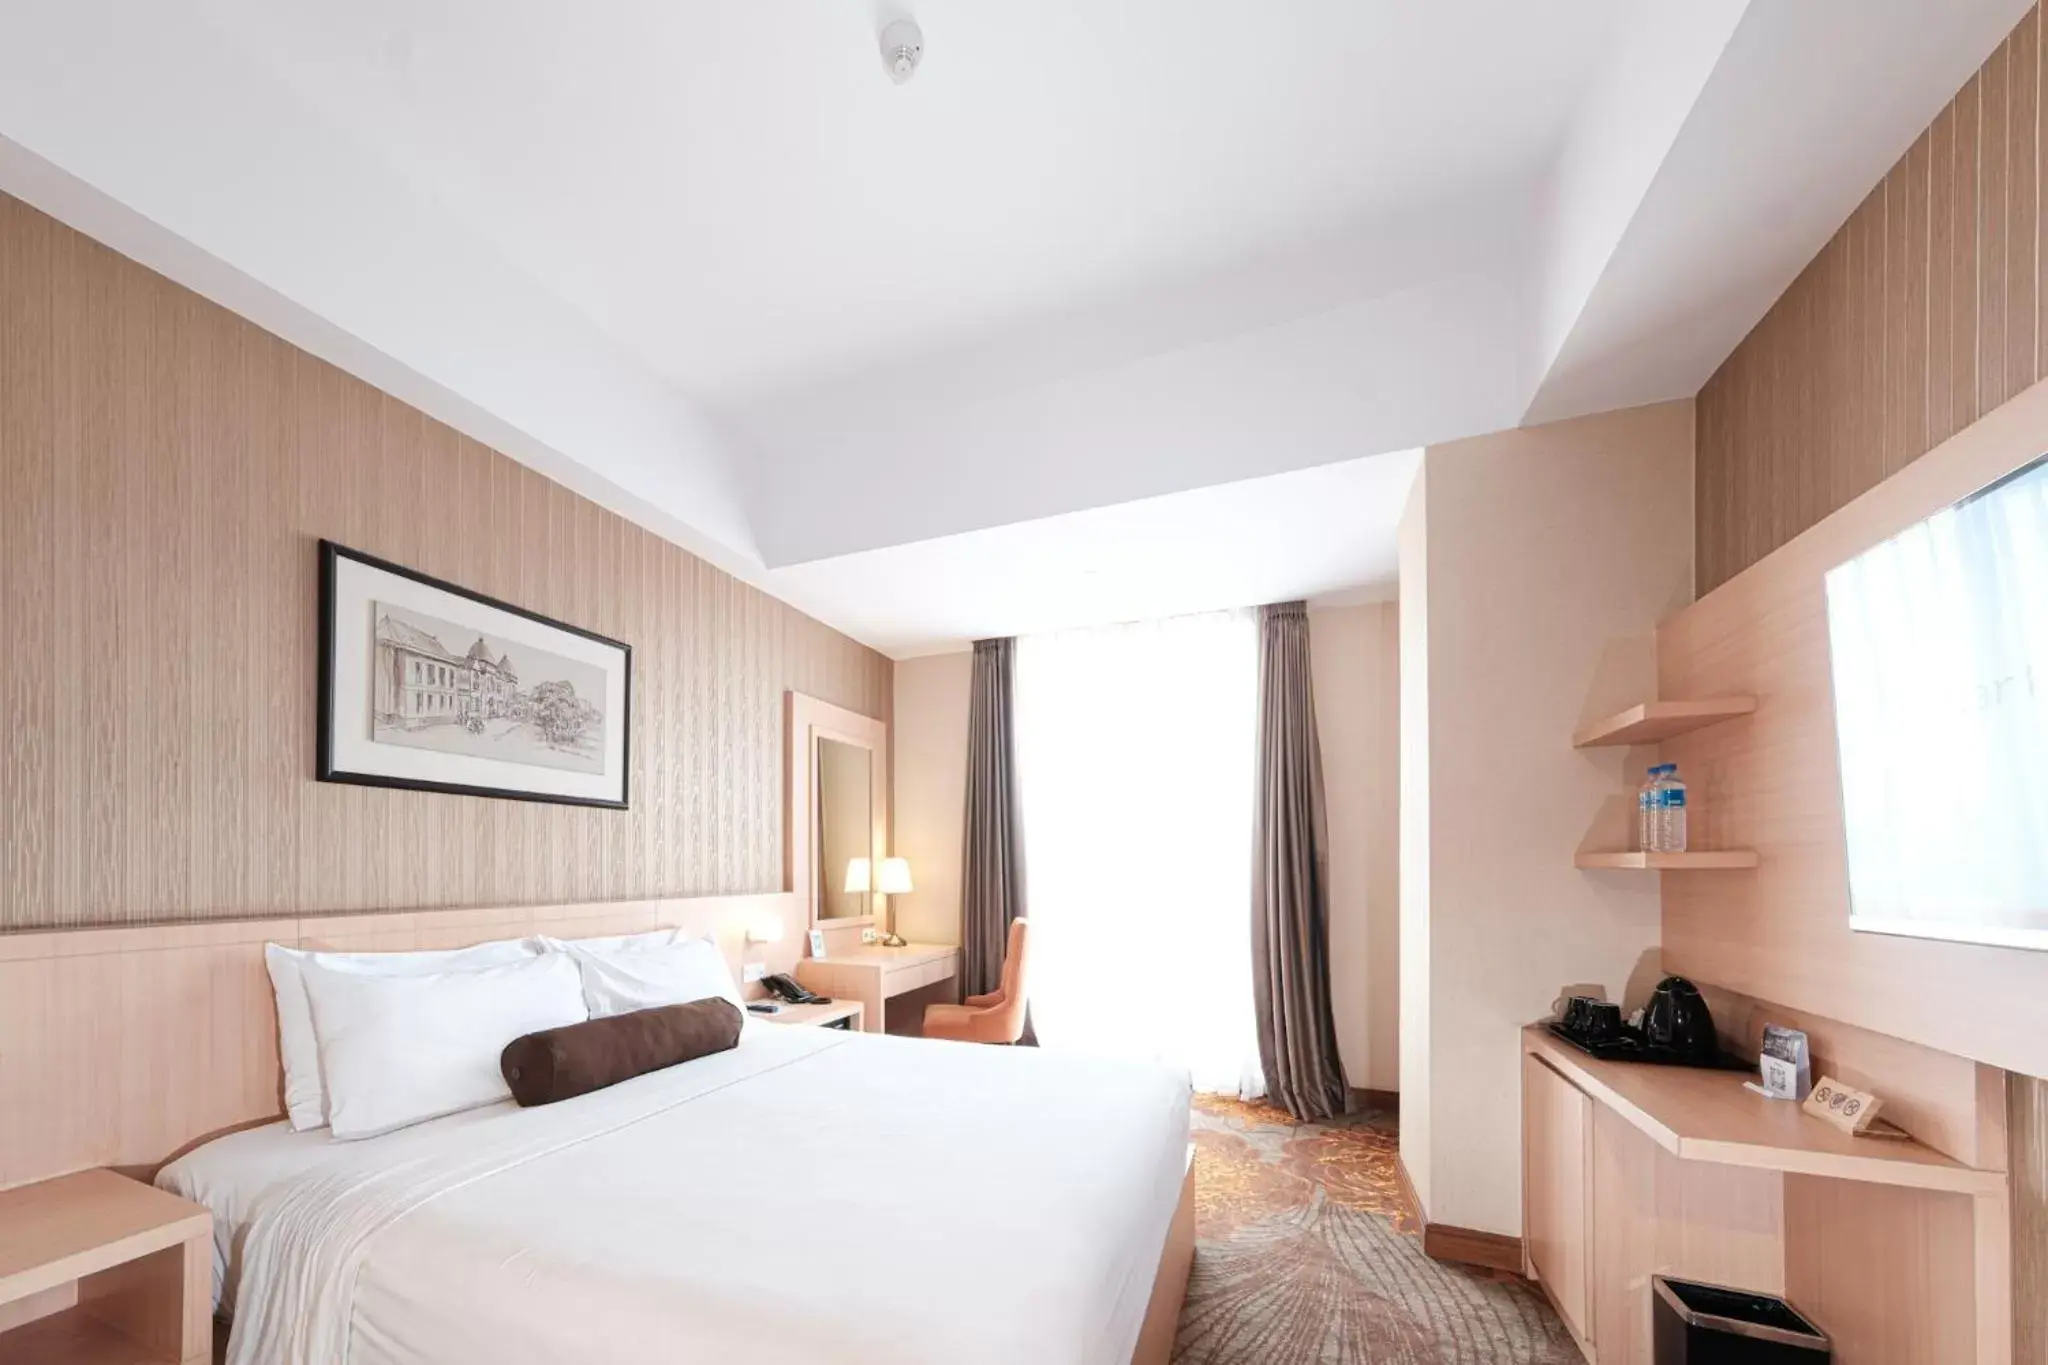 Bed in Hotel Chanti Managed by TENTREM Hotel Management Indonesia